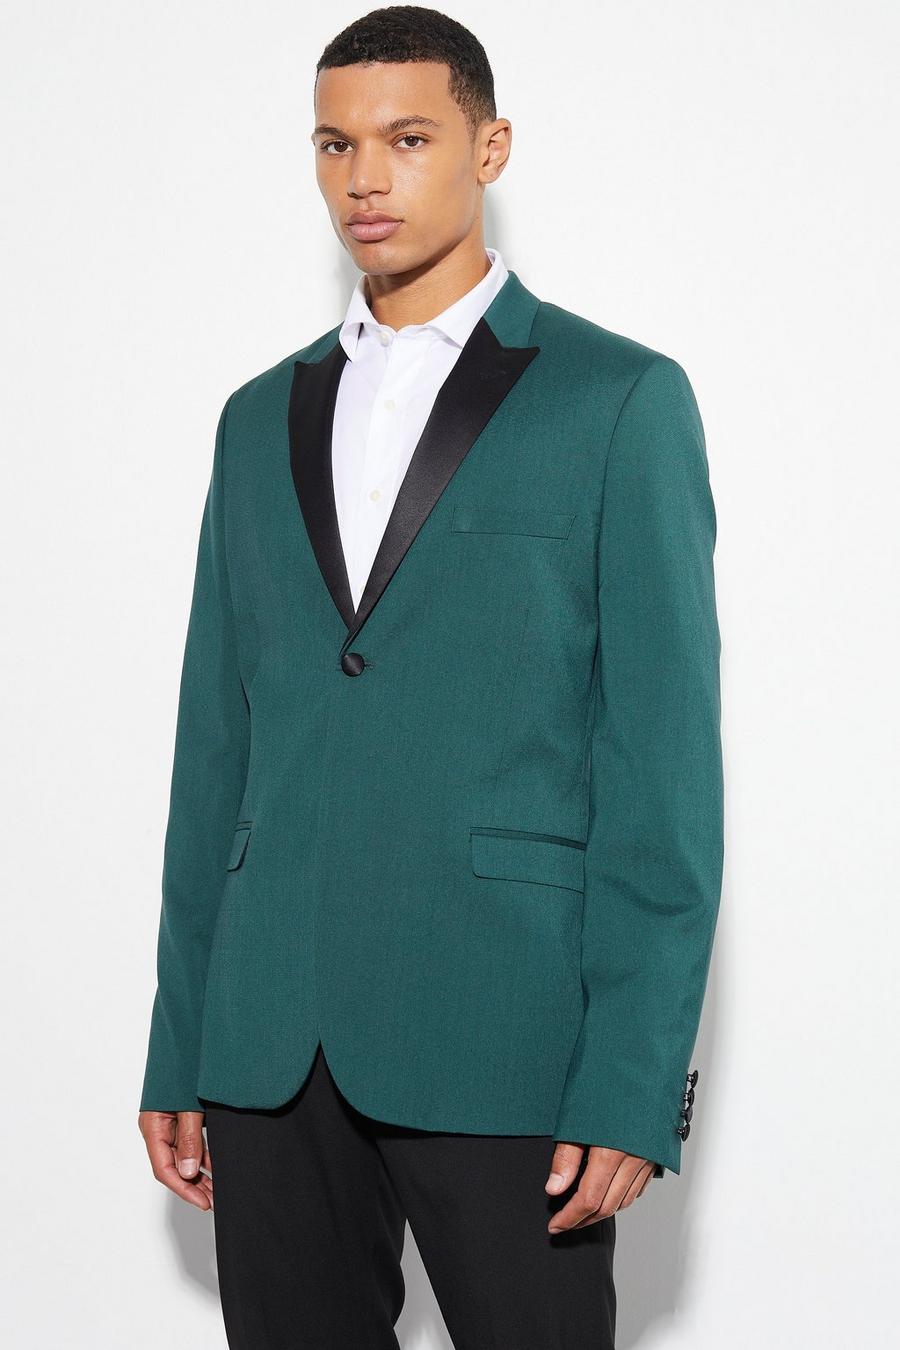 Forest green Tall Skinny Tuxedo Single Breasted Suit Jacket image number 1